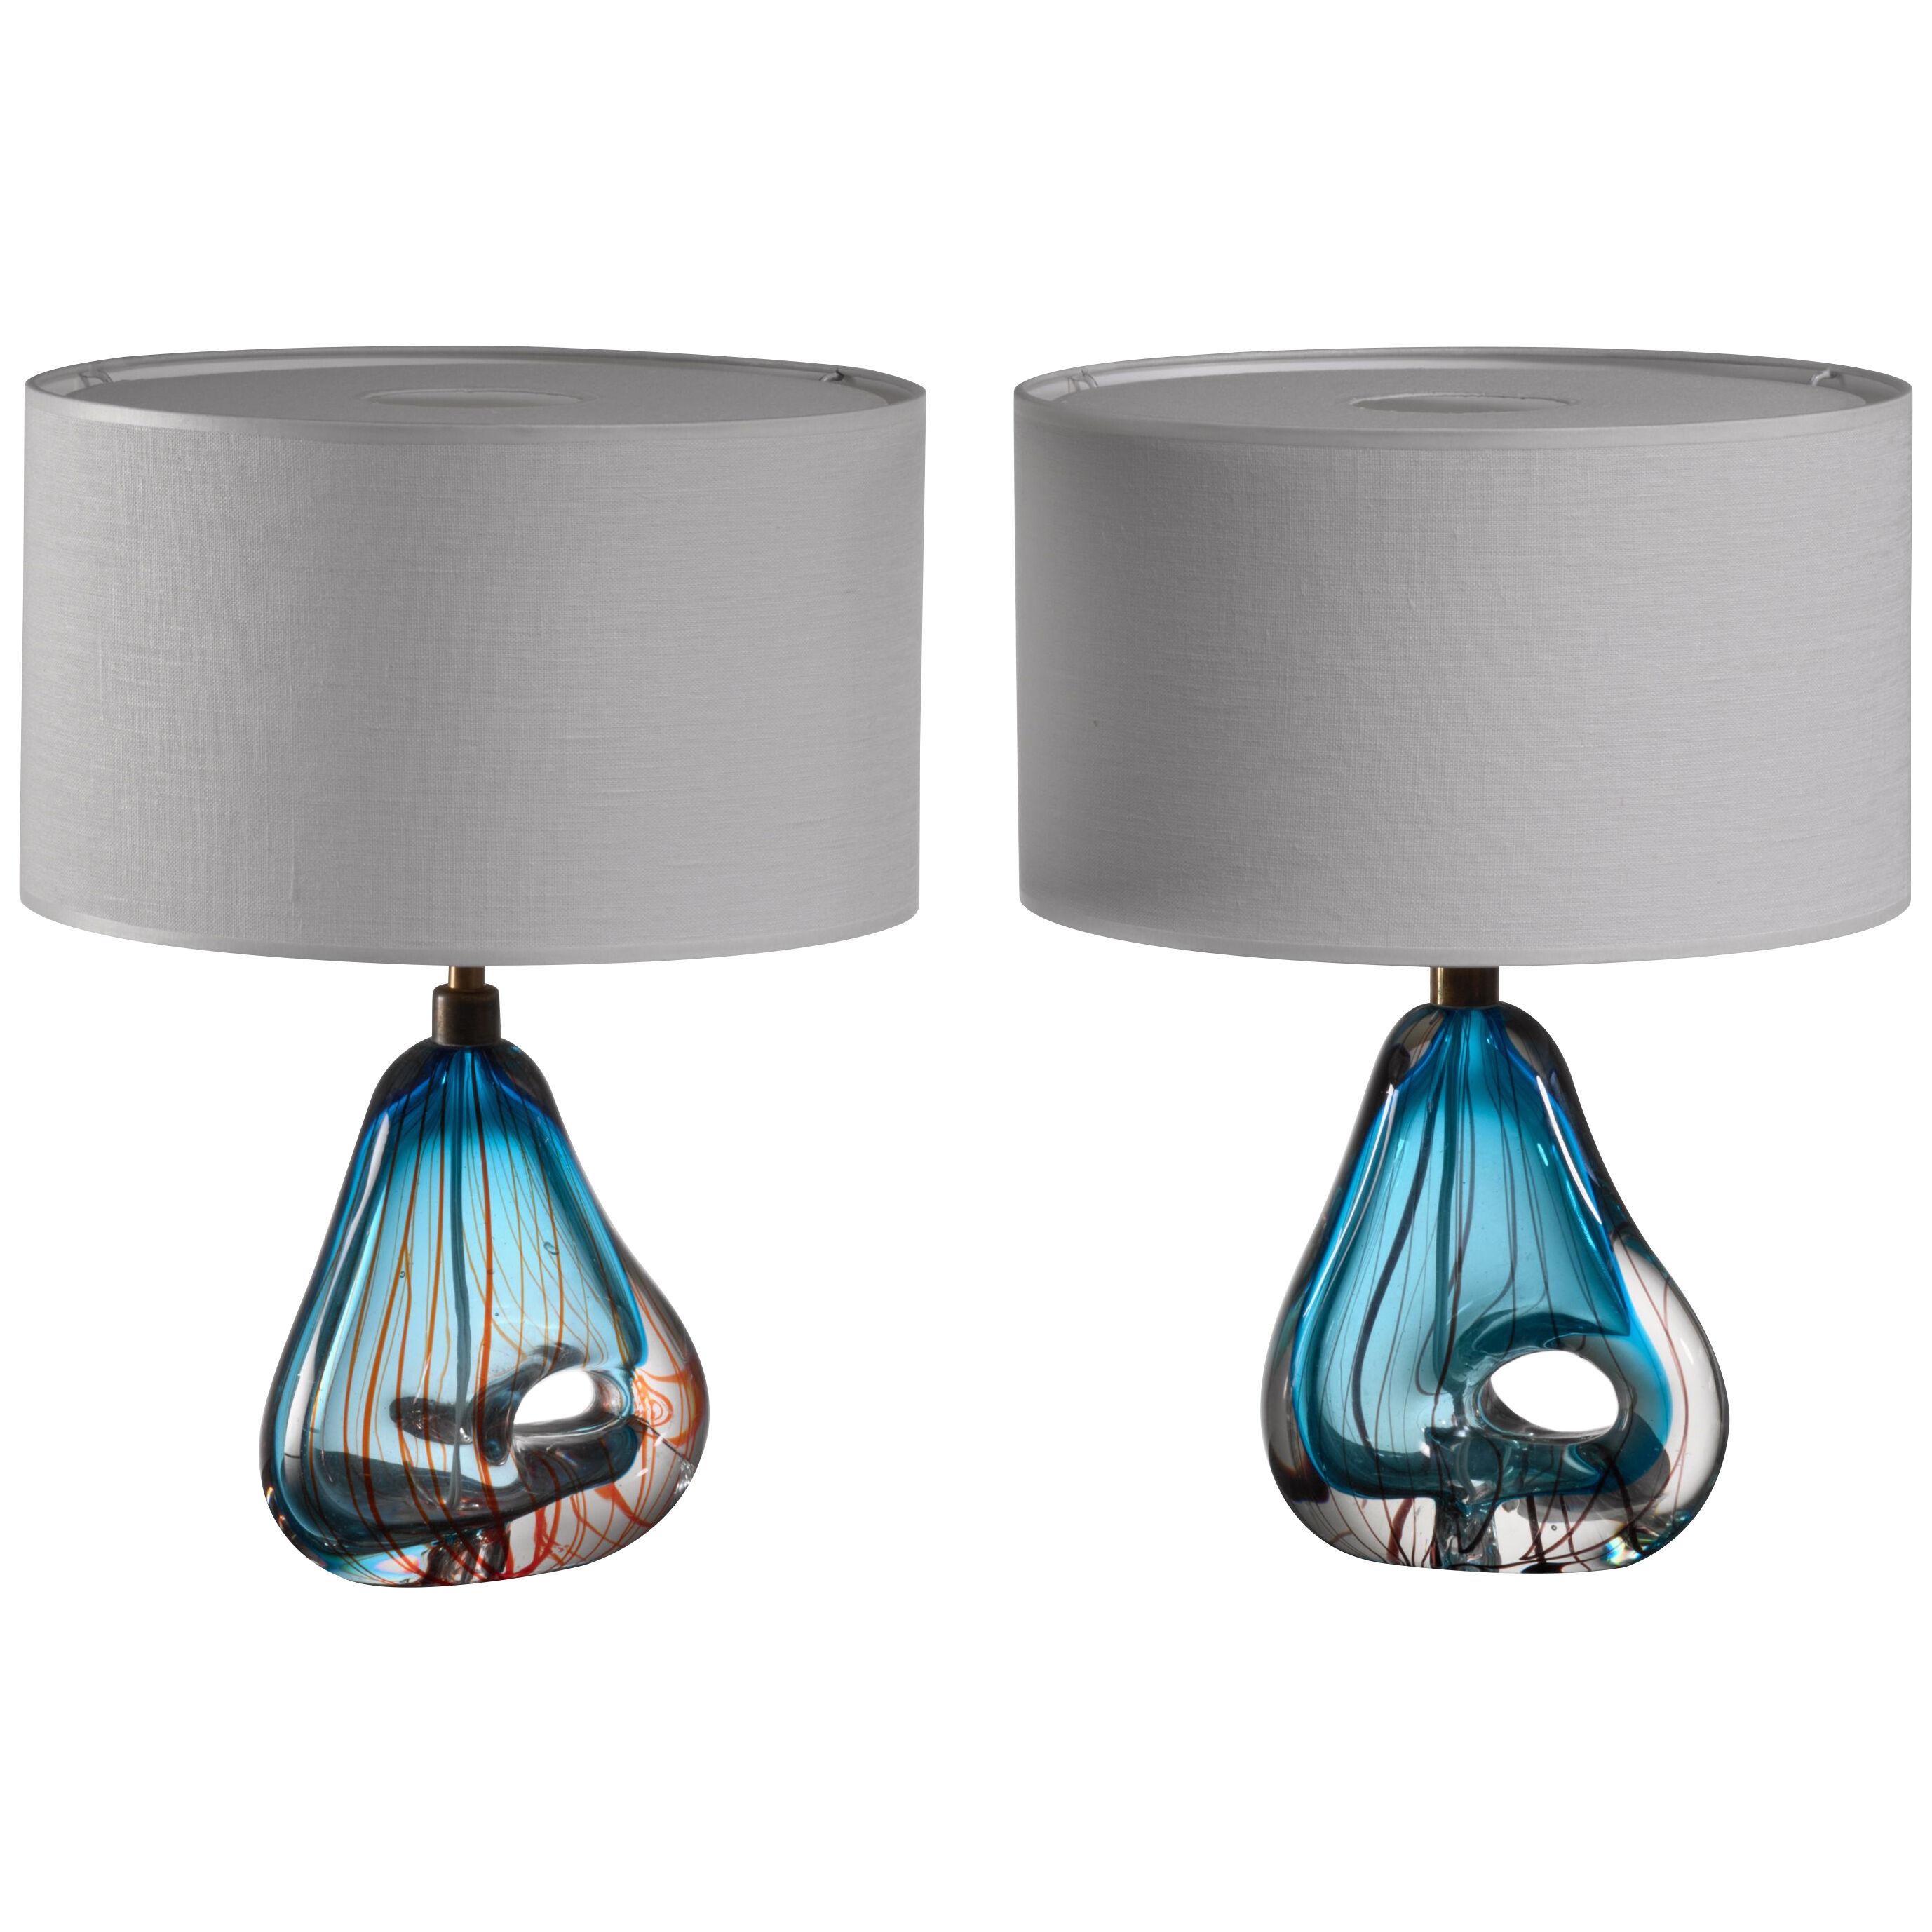 Pair of Blue Murano Glass Table Lamps, Italy, 1950s